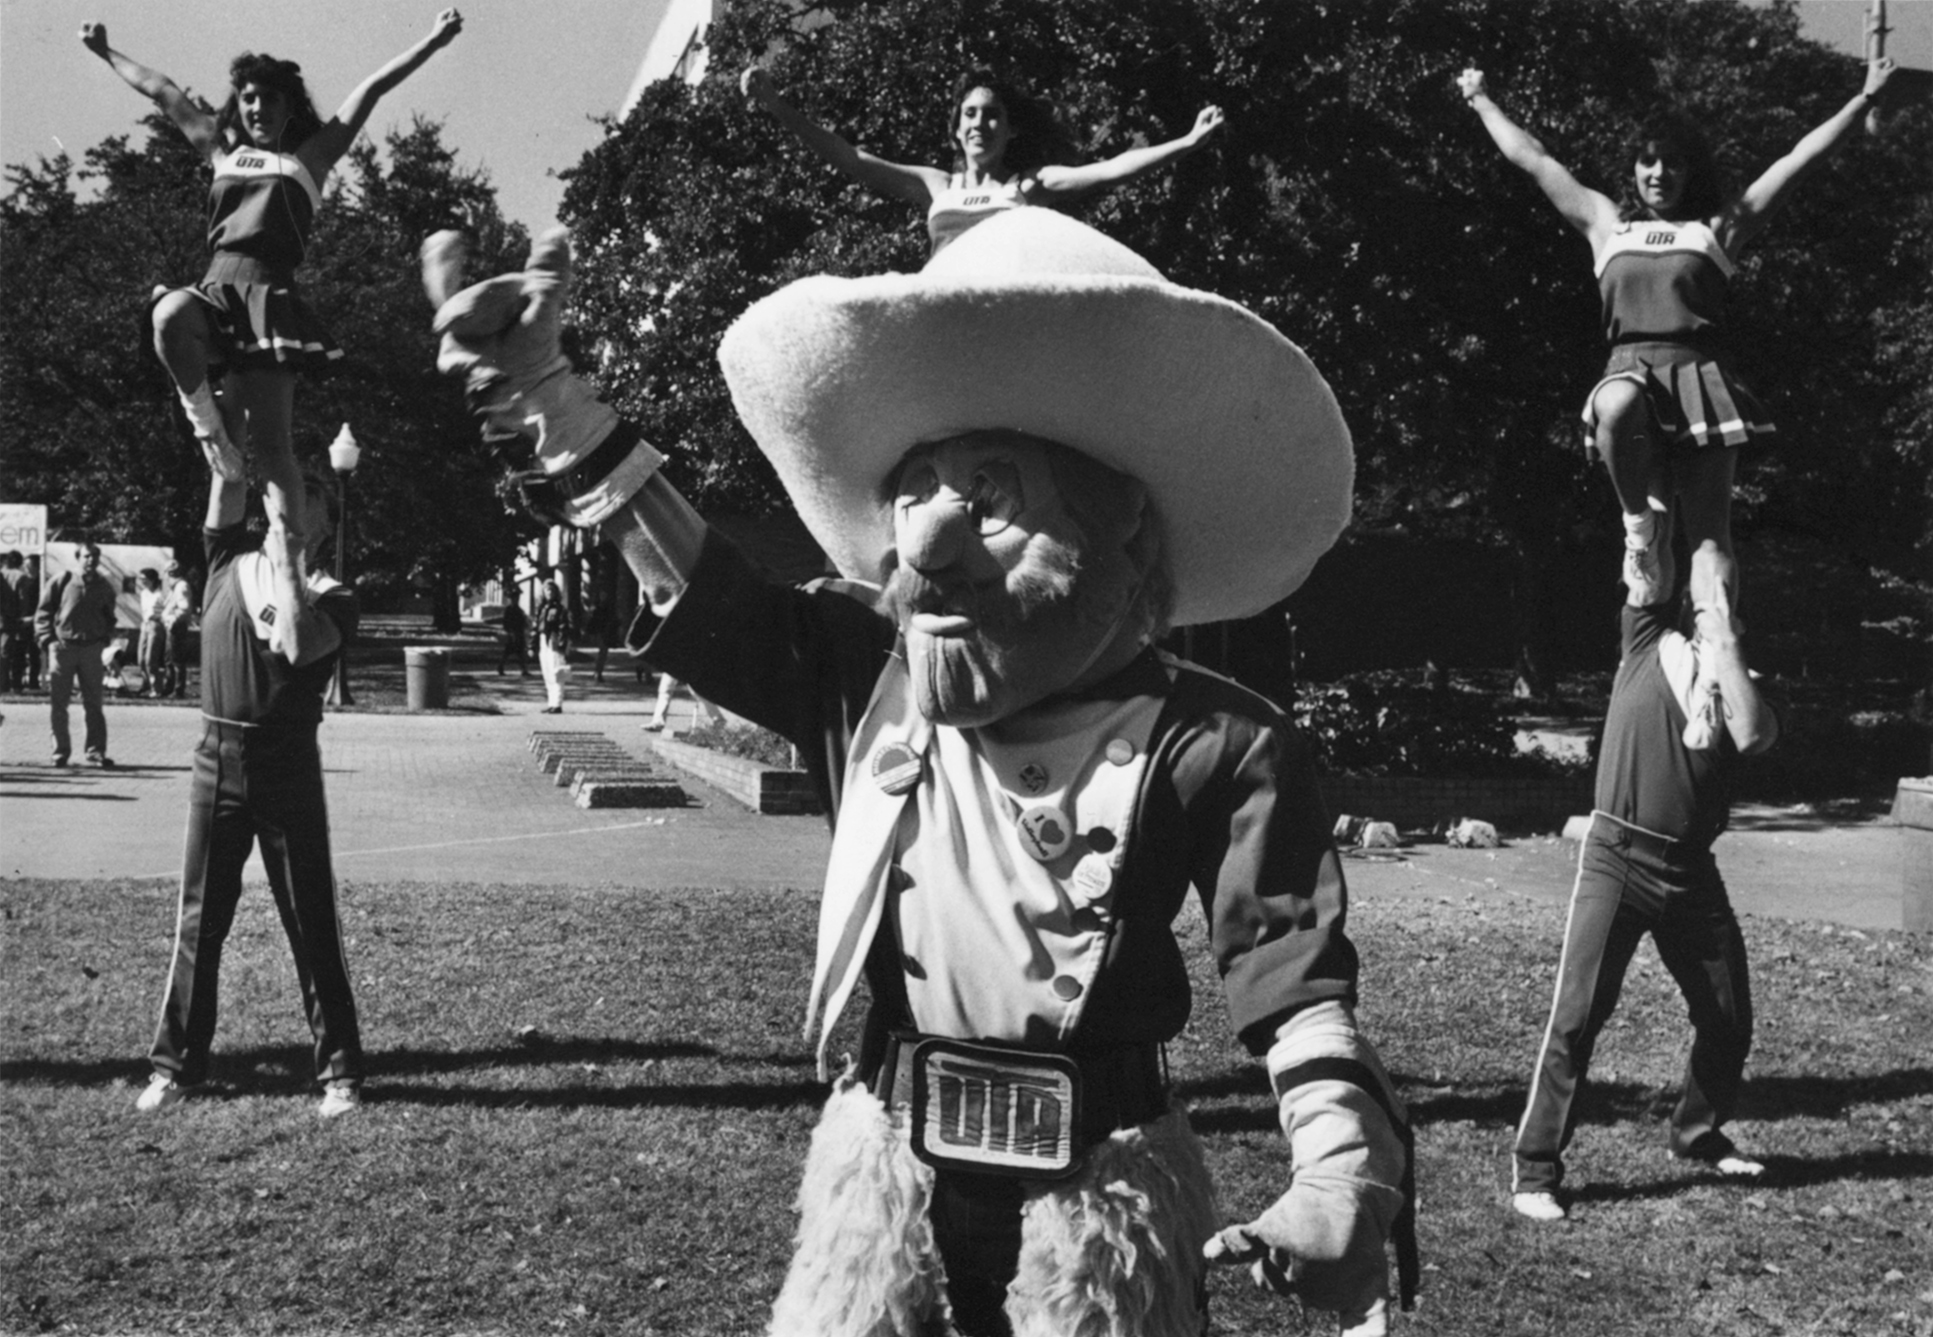 Black and white photo of a mascot wearing a large cowboy hat and western attire with a group of cheerleaders seen in the background.